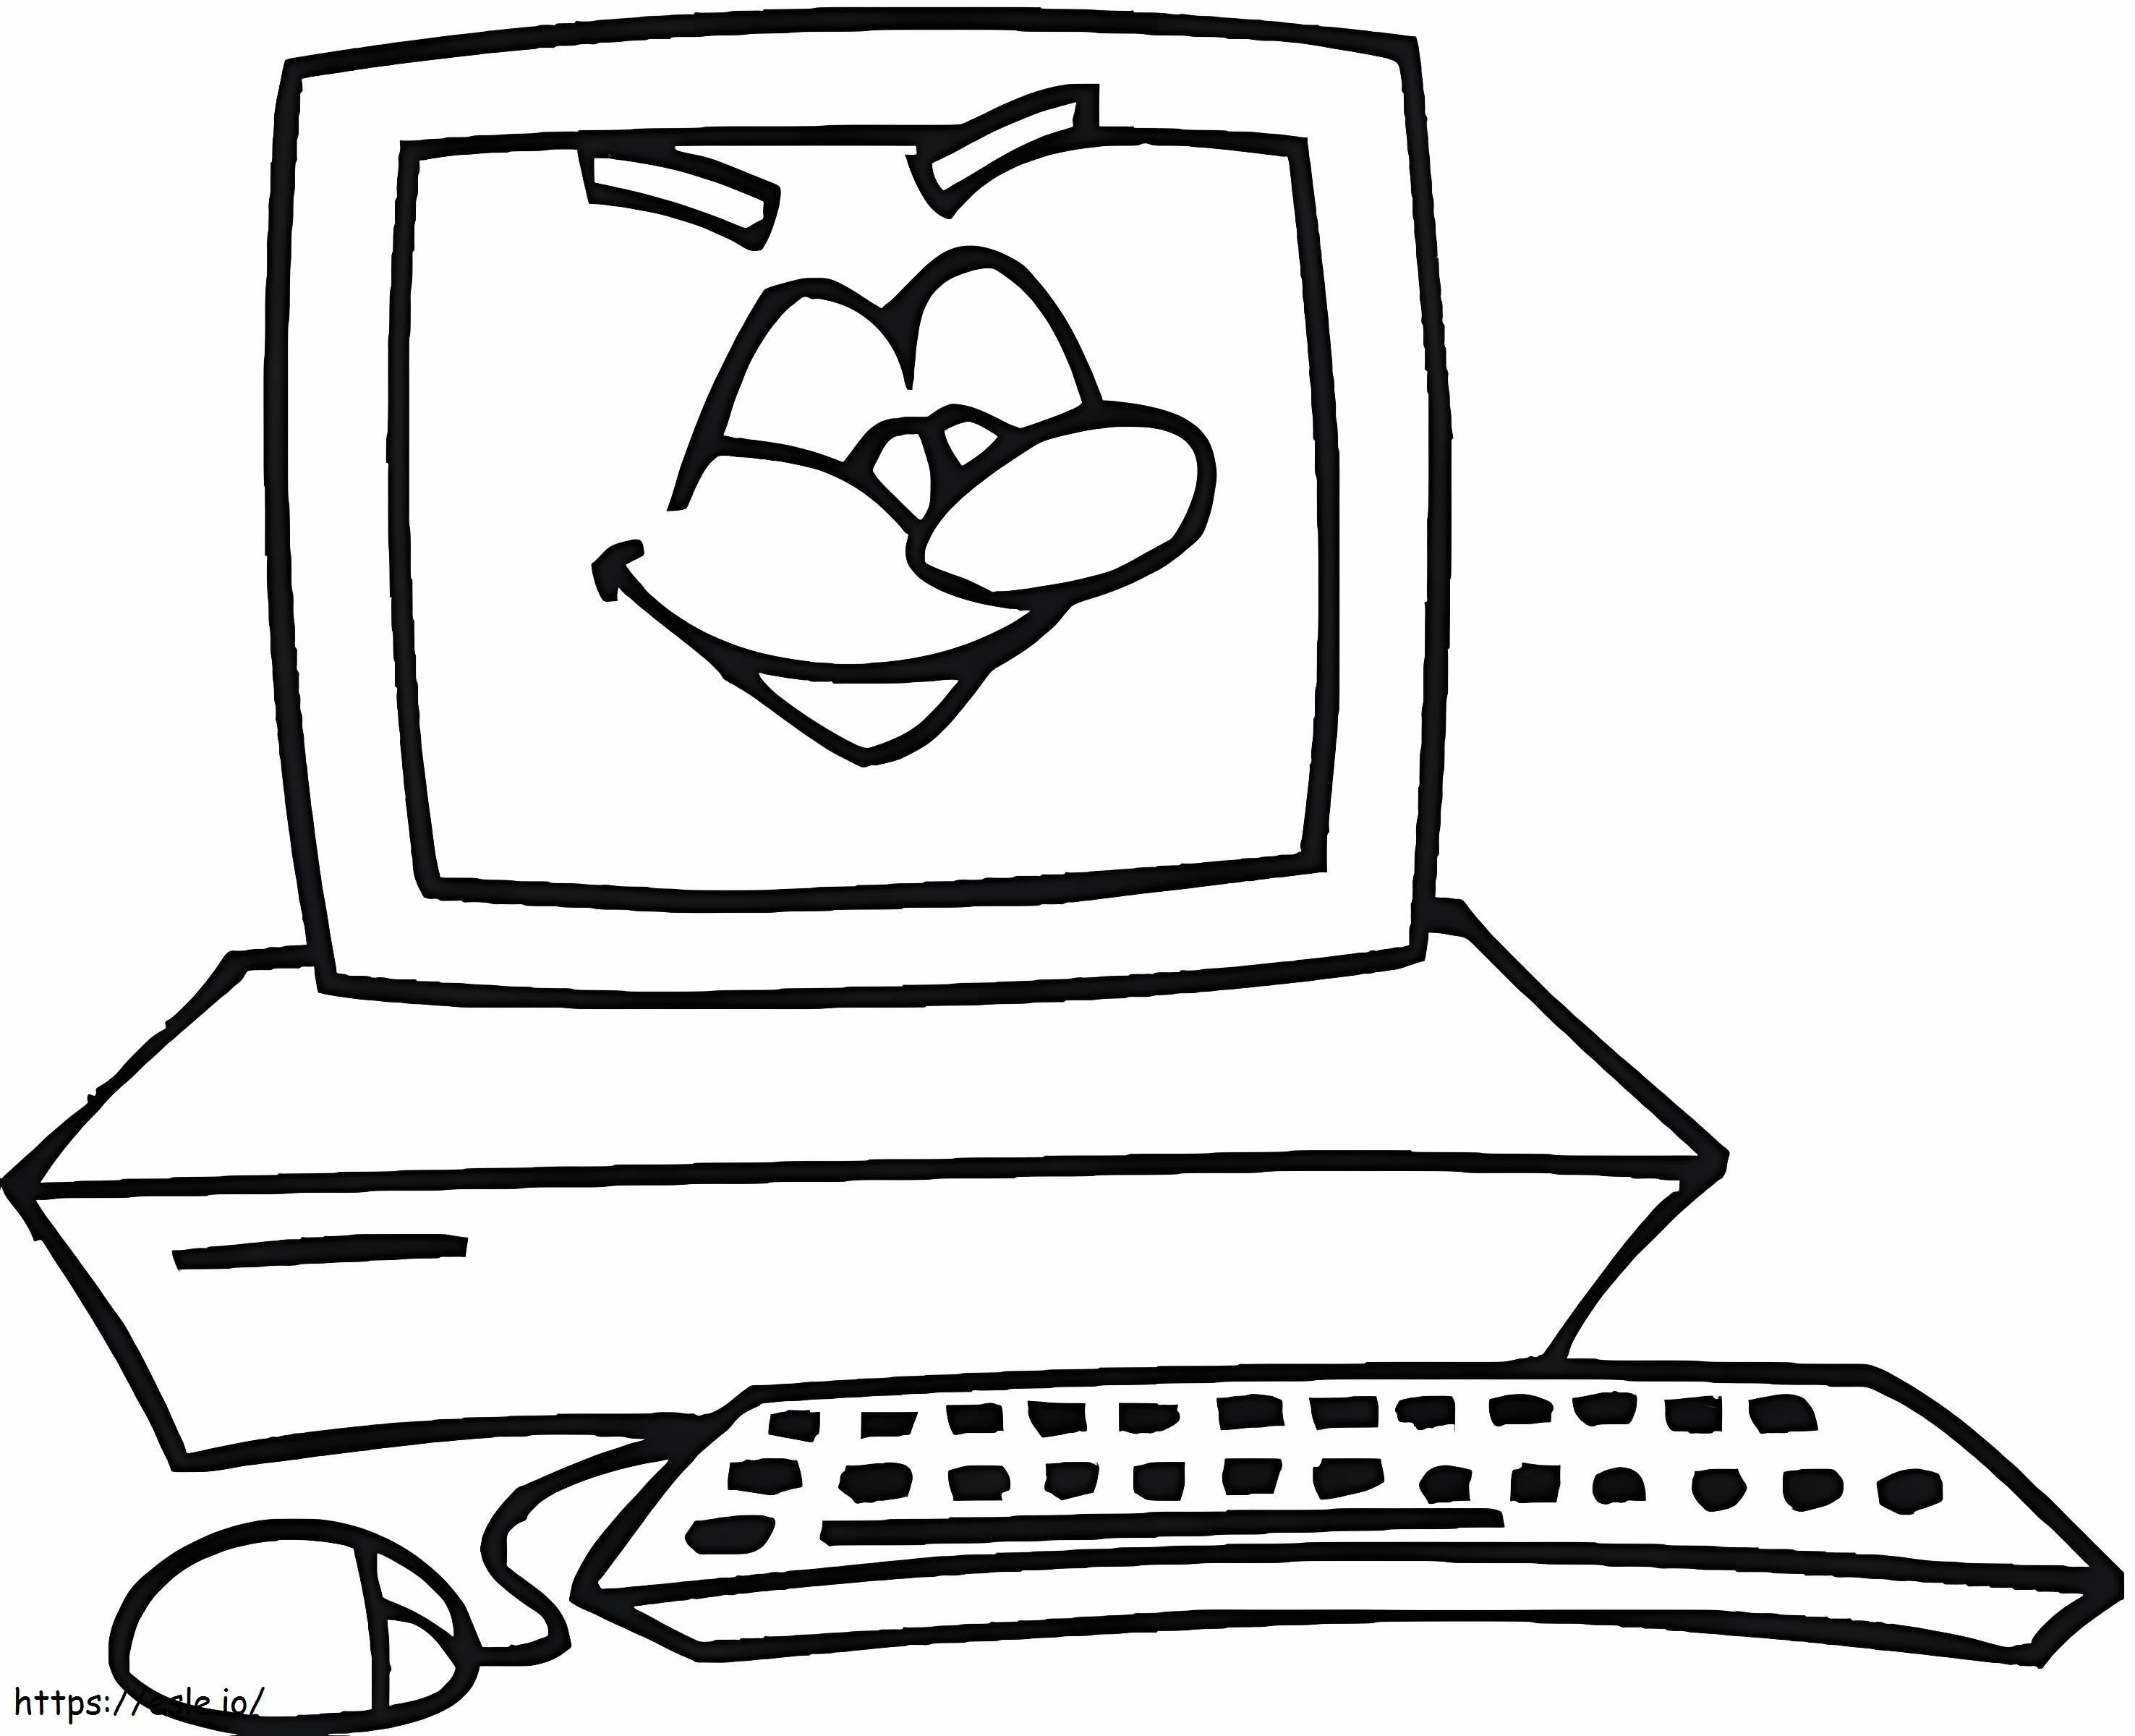 Computer Smiling coloring page